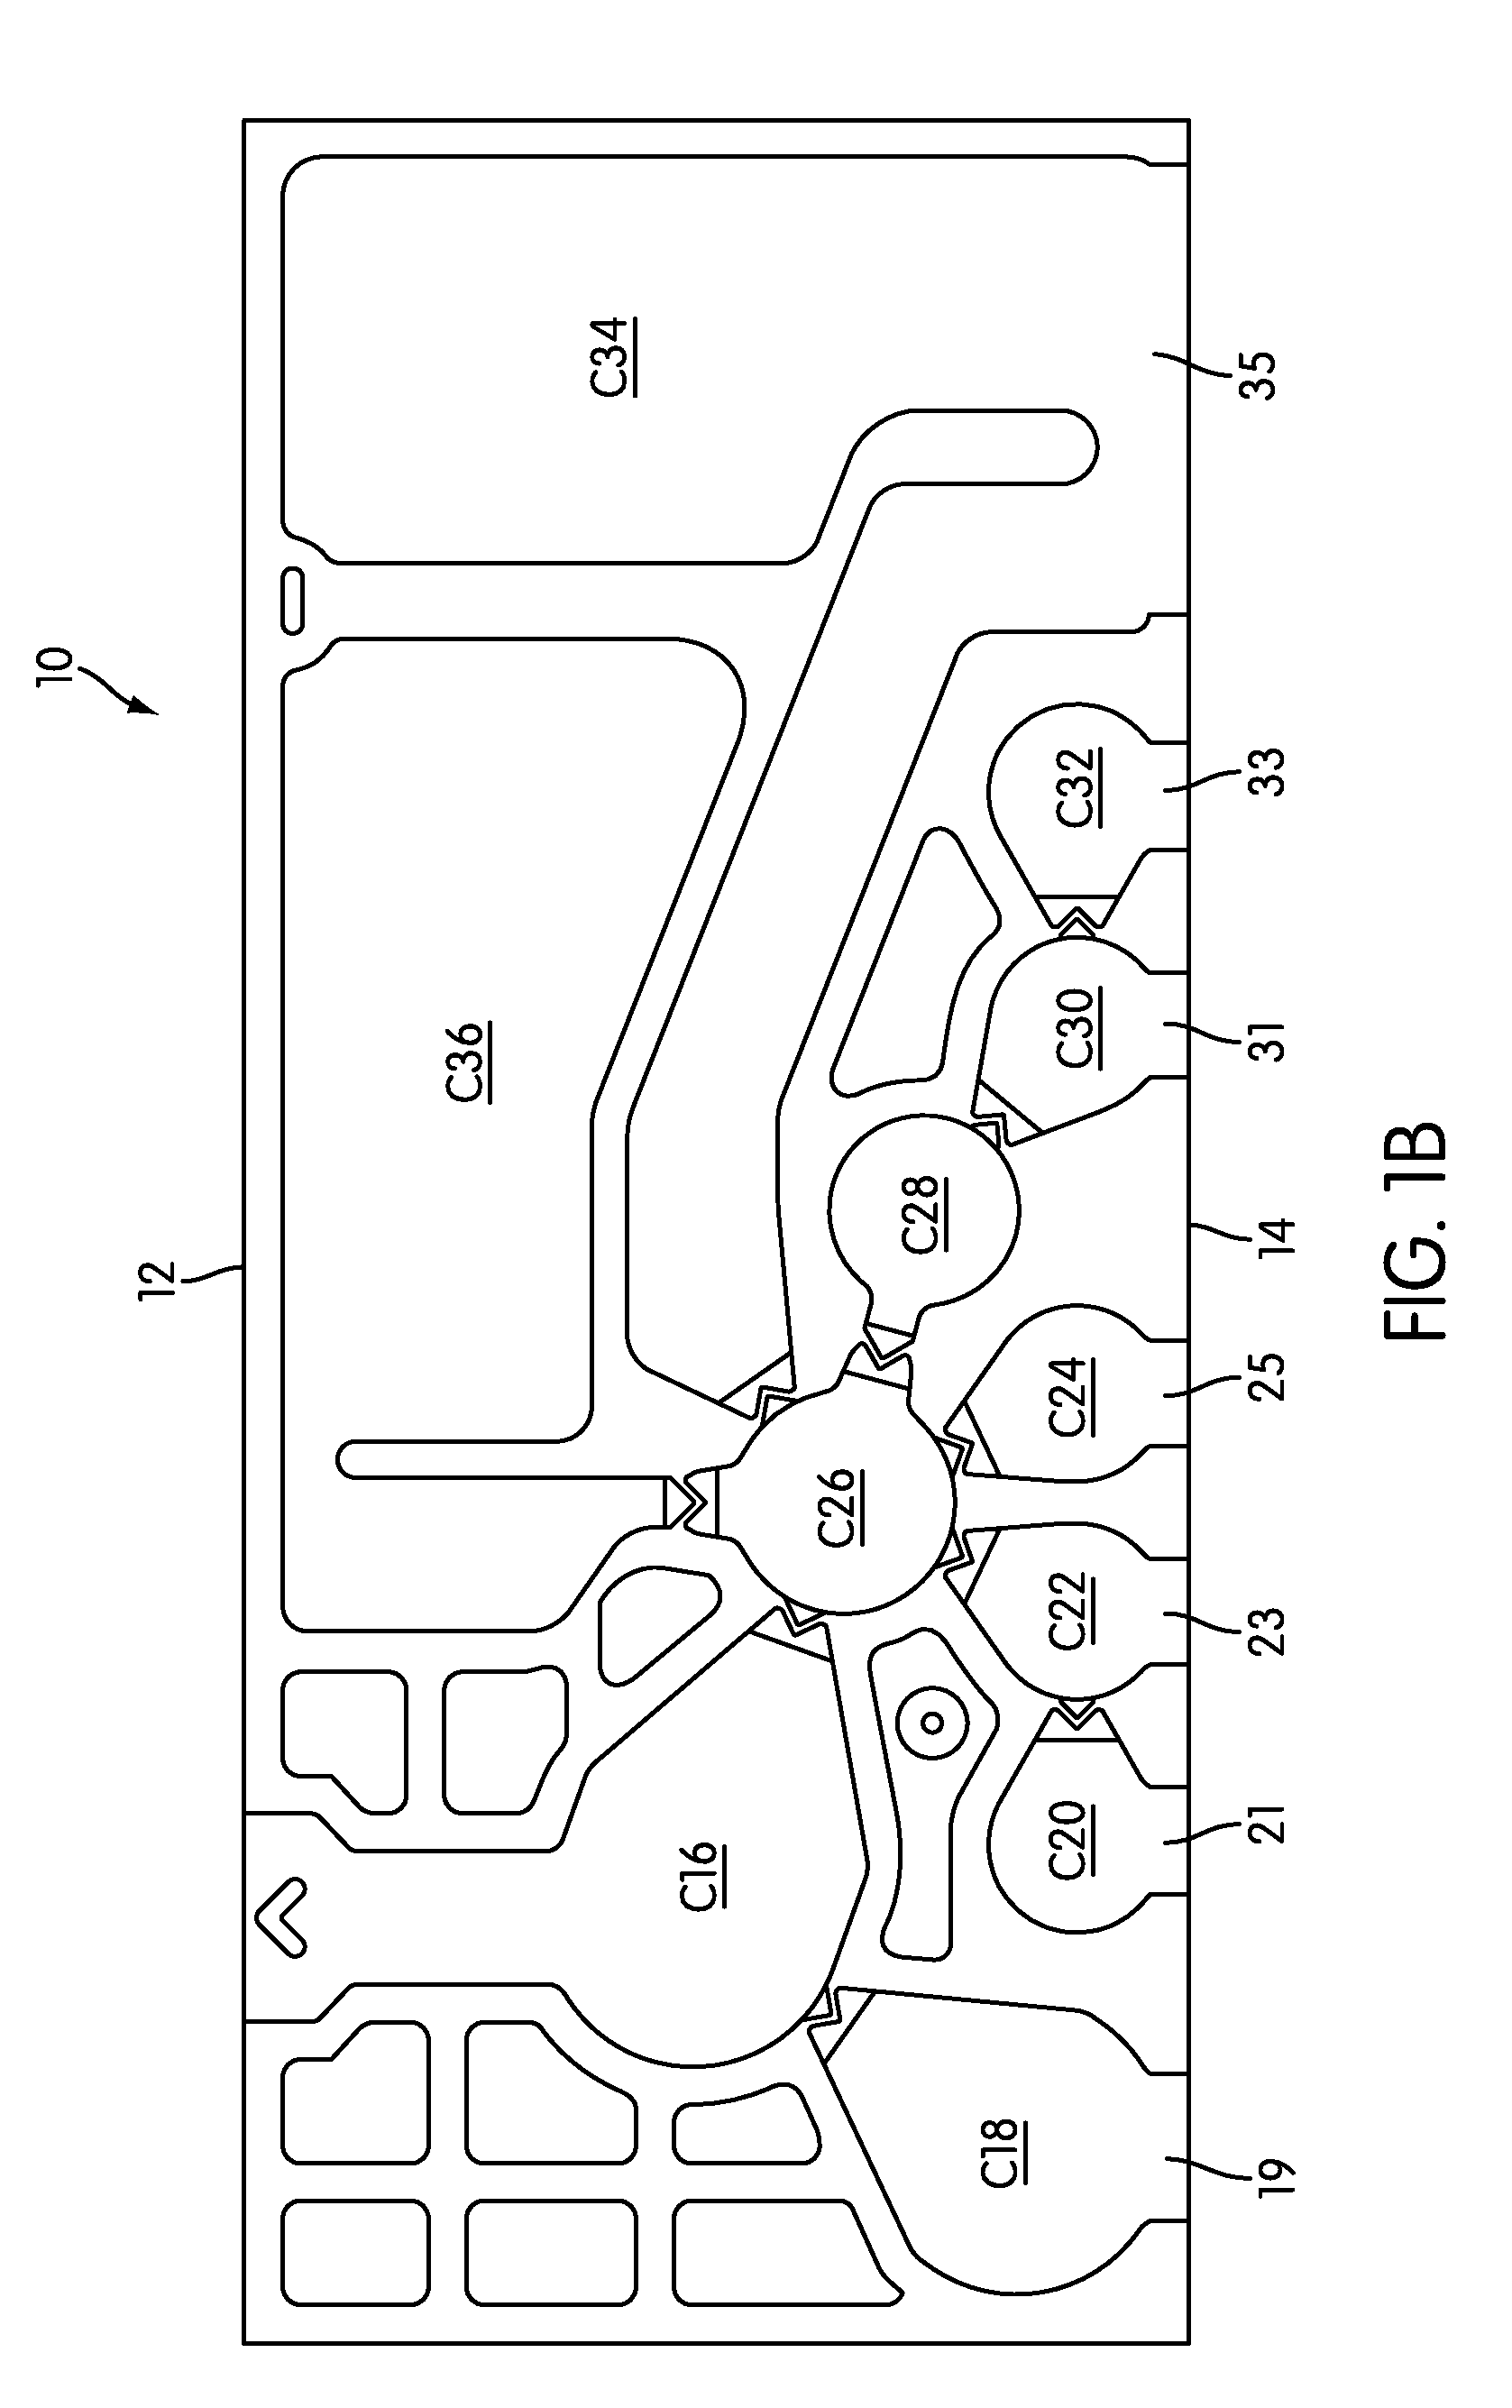 Systems and methods for detecting a signal and applying thermal energy to a signal transmission element